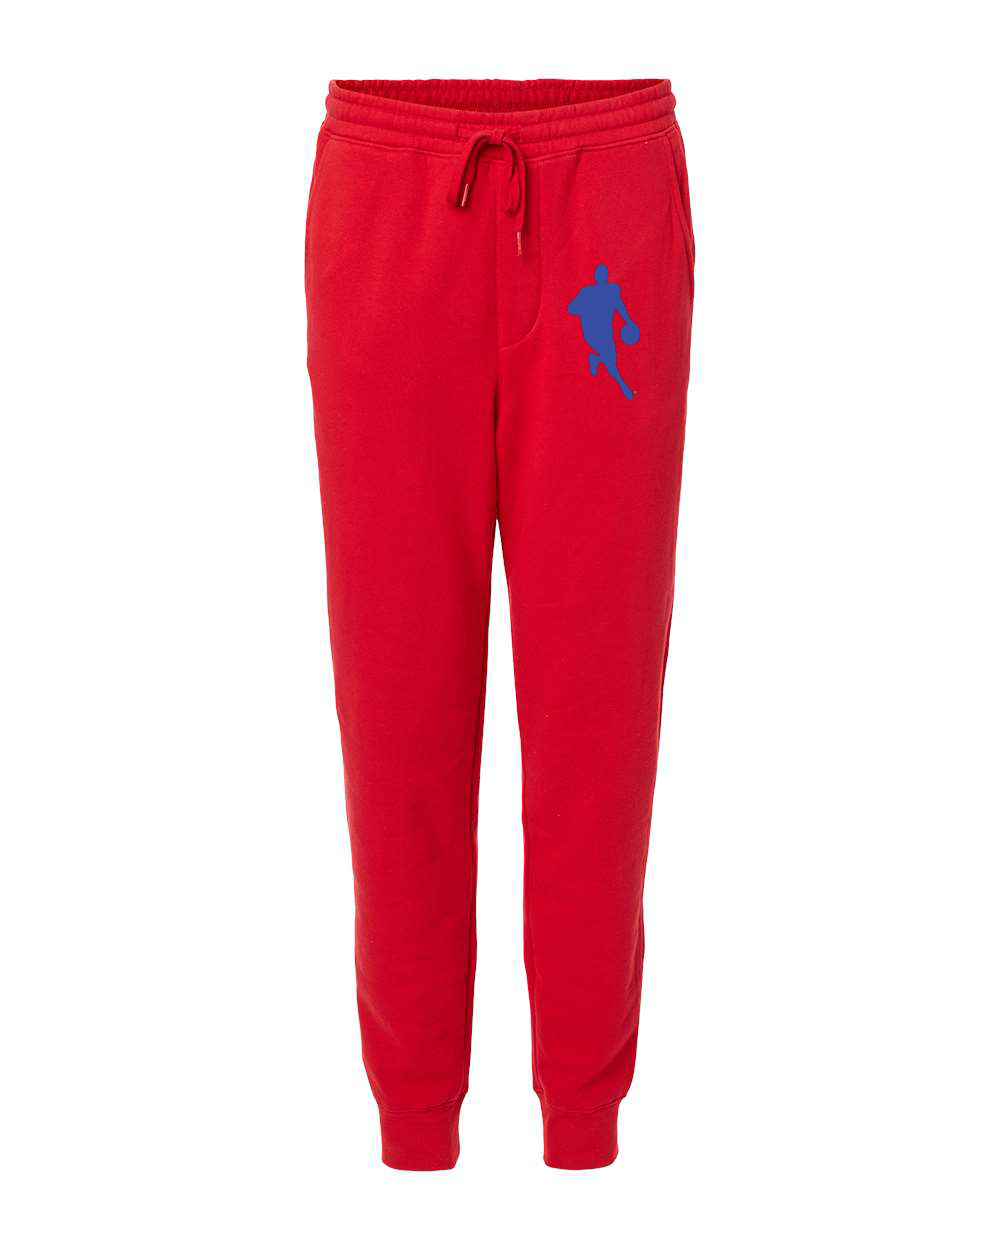 RED W.L.A.B. ROYAL BLUE MIDWEIGHT FLEECE JOGGERS